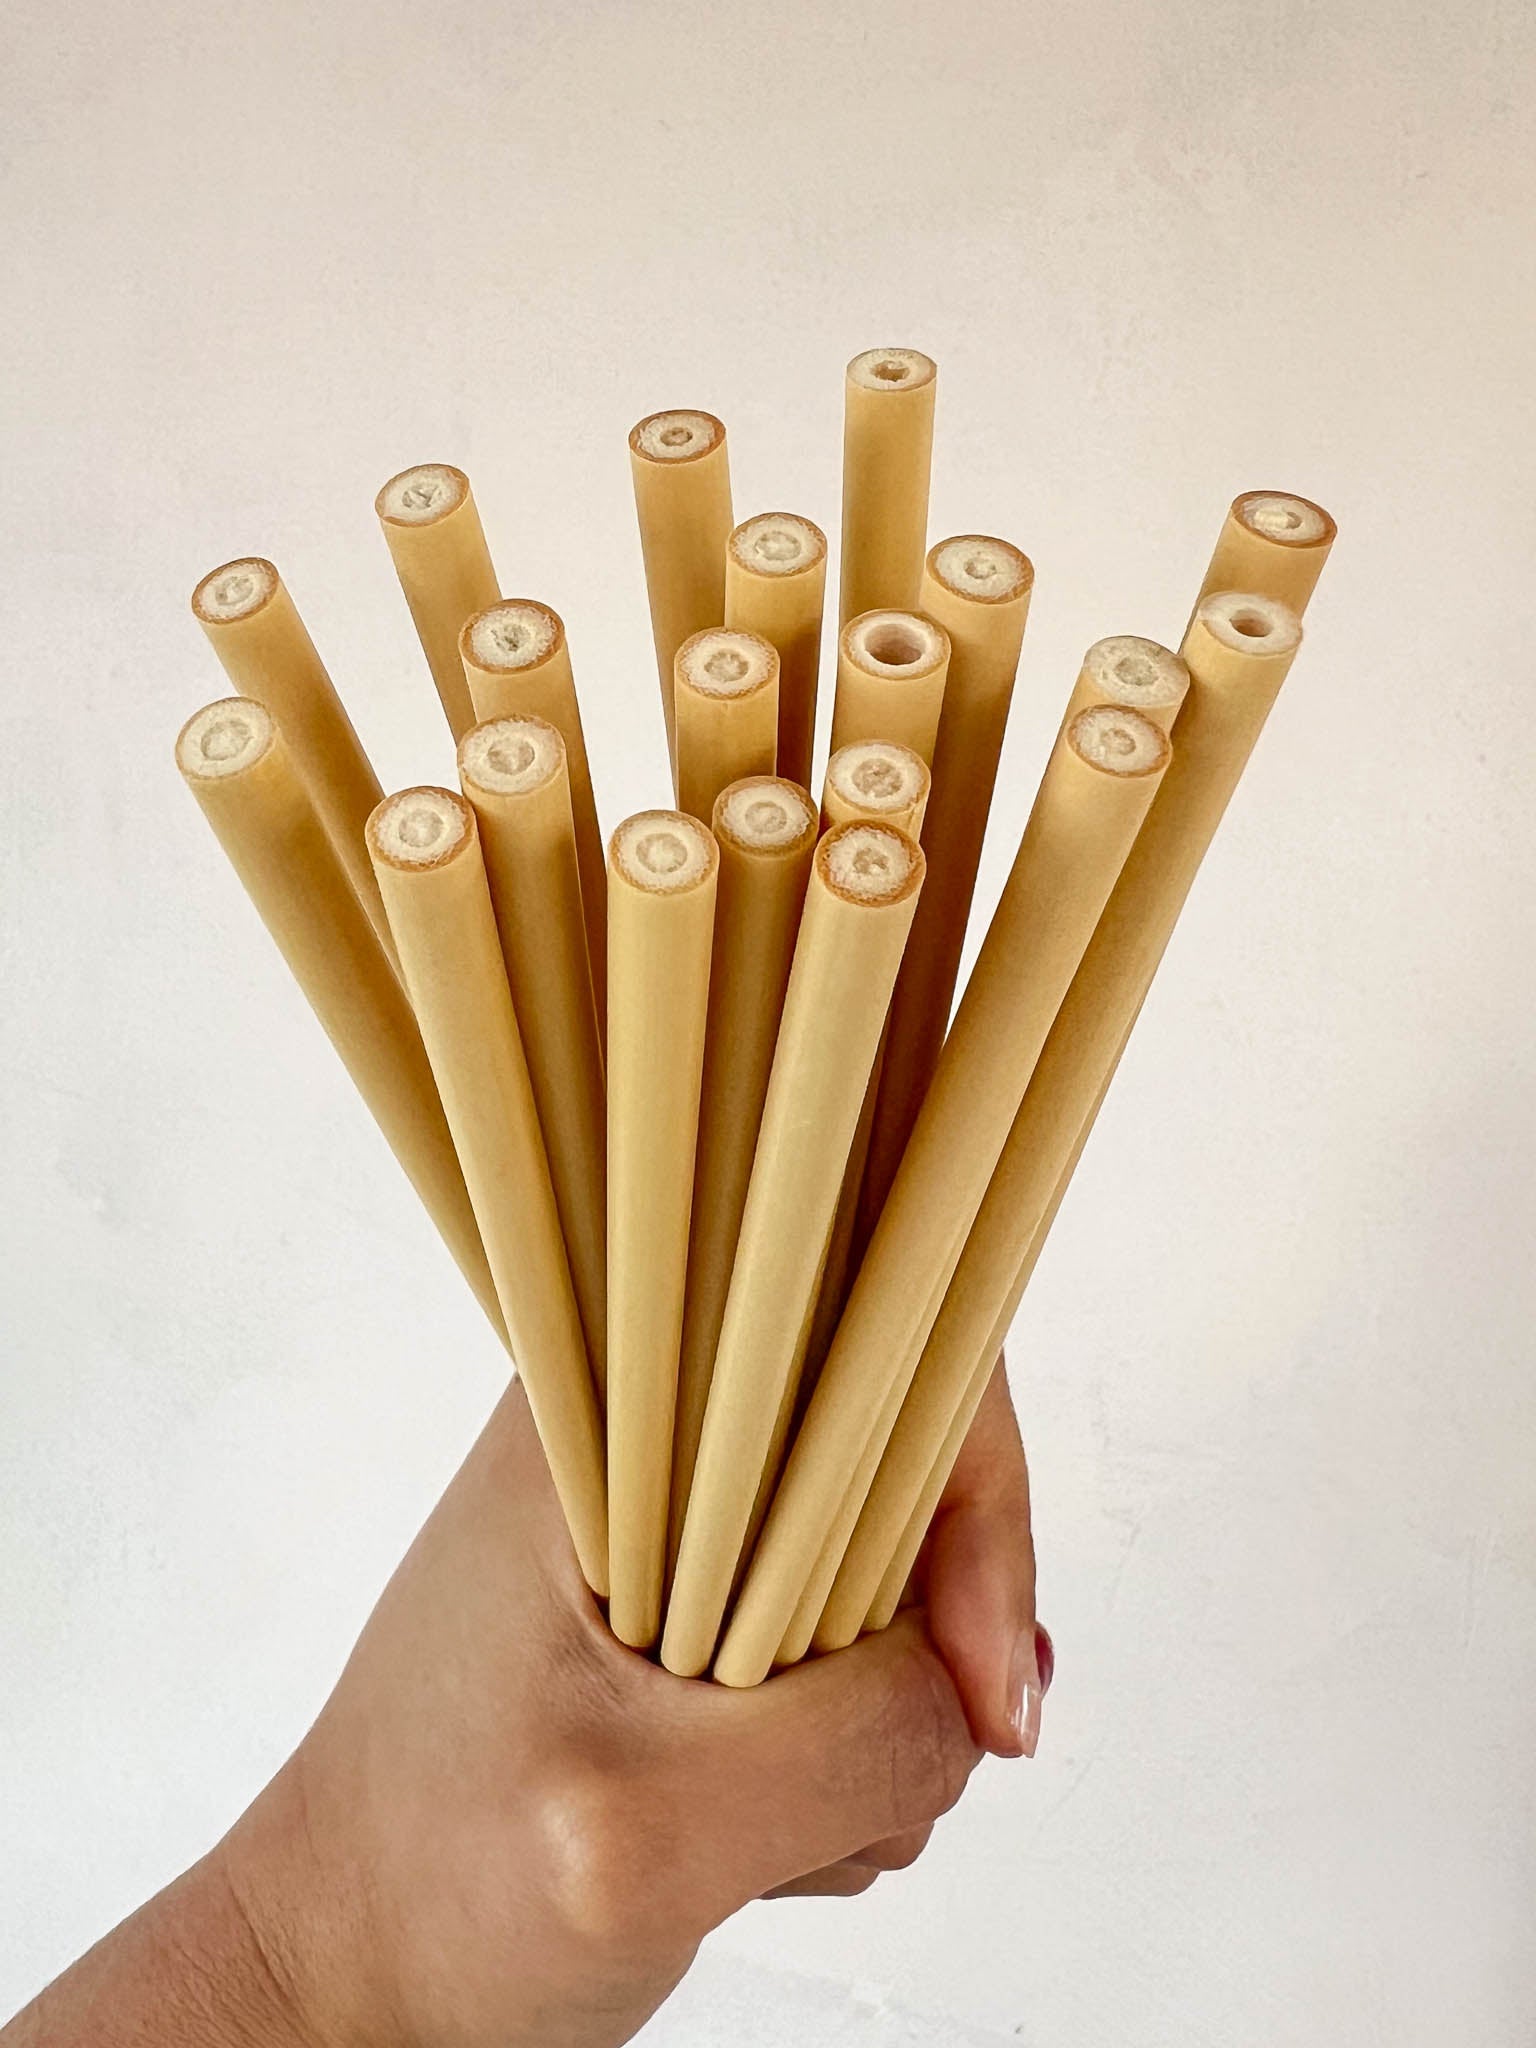 Chinoiserie paint brushes showing the natural bamboo handle